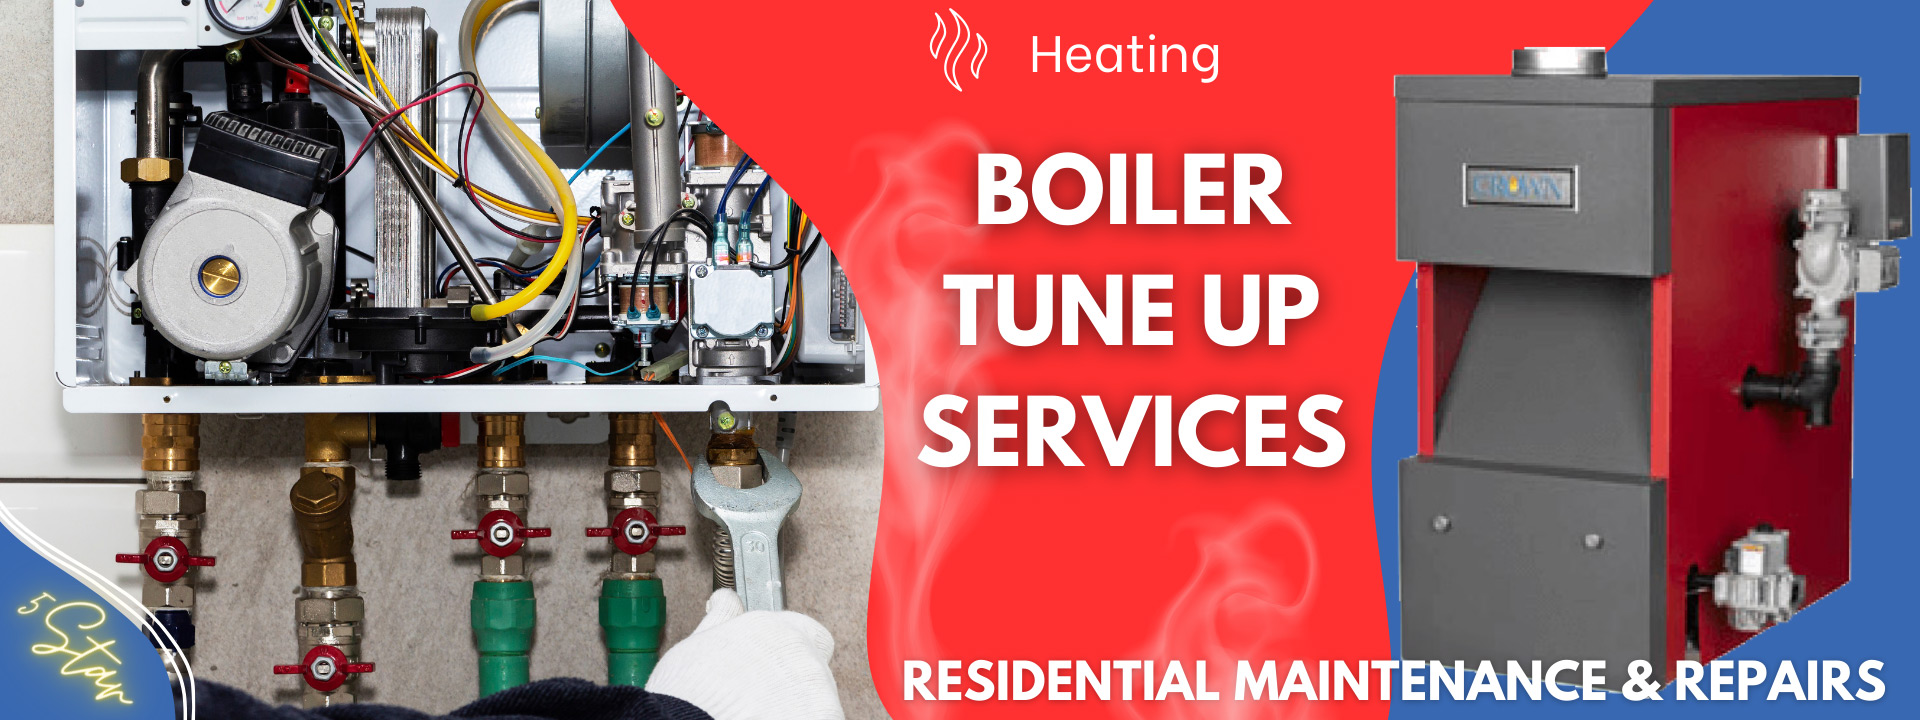 Boiler Tune Up Maintenance Services